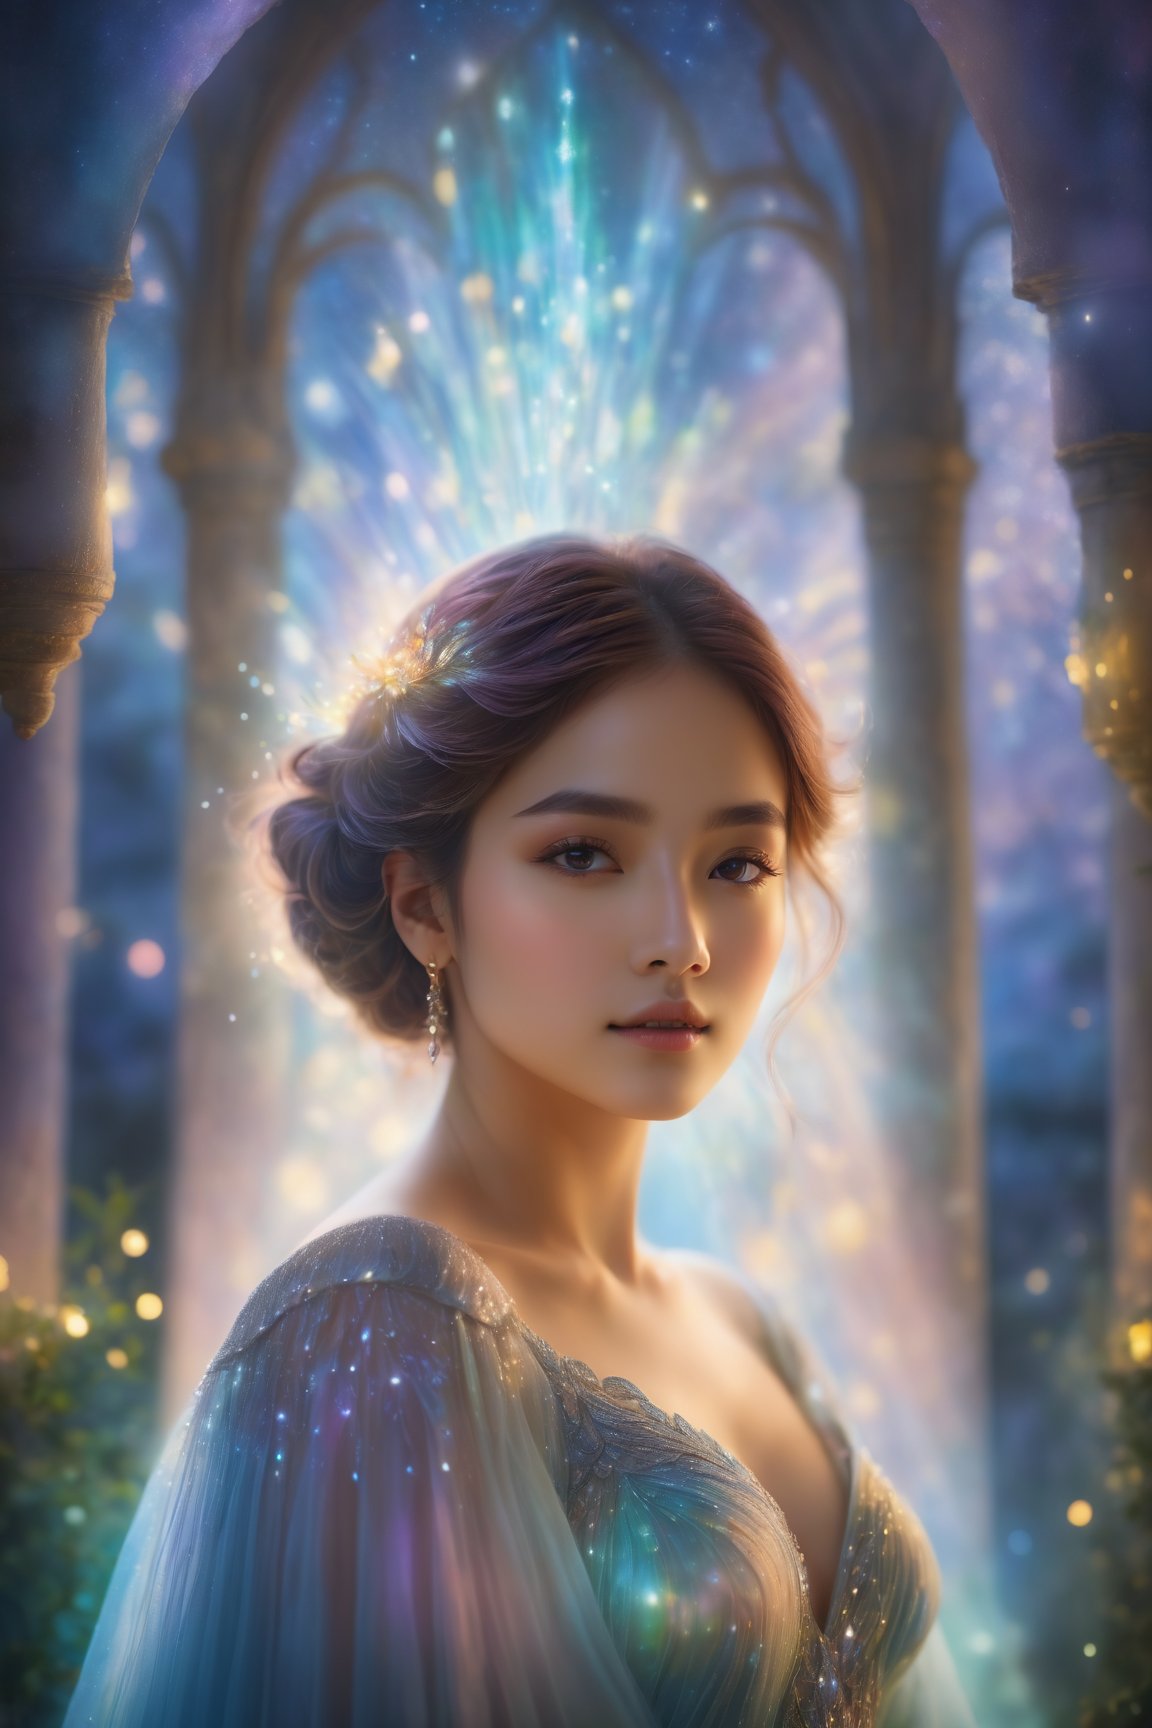 (best quality,8K,highres,masterpiece), ultra-detailed, featuring a woman adorned in an off-shoulder dress that emits a soft, ethereal light, creating a magical atmosphere around her. Her short hair appears to be infused with the same radiant glow, adding to the enchanting mood of the scene. The backdrop consists of blurred lights, their glow enhancing the ethereal ambiance and conveying a sense of wonder and enchantment. The woman's presence is captivating, as she stands amidst this luminous backdrop, exuding an aura of mystery and beauty. This artwork transports viewers to a world of magic and fantasy, where light and color intertwine to create a mesmerizing spectacle that captures the imagination.